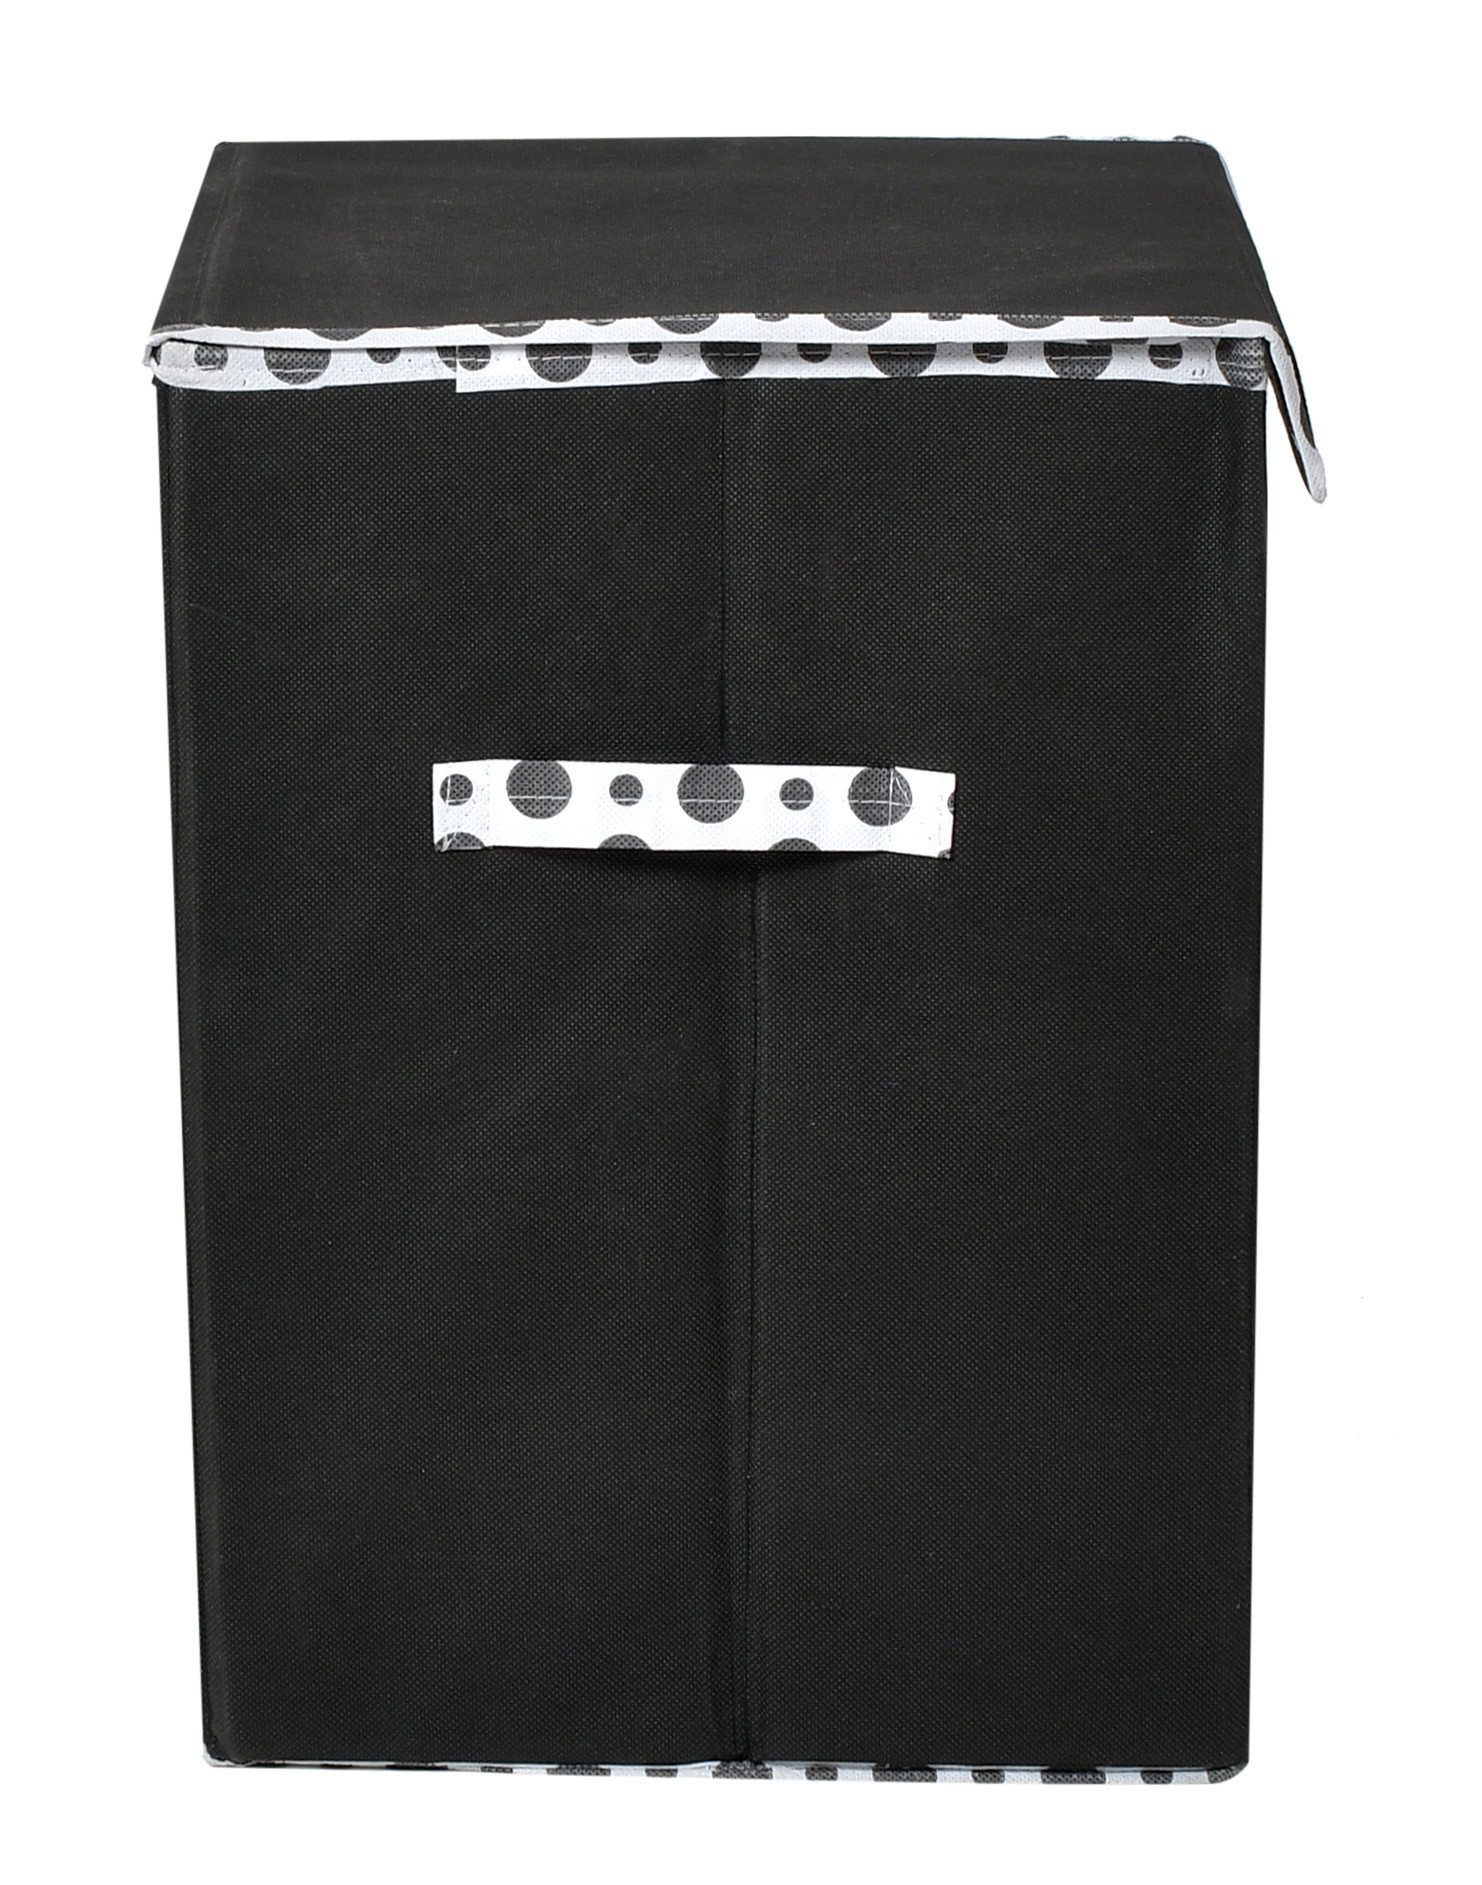 Kuber Industries Non-Woven Foldable Large Laundry basket/Hamper With Lid & Handles (Black)-44KM0193